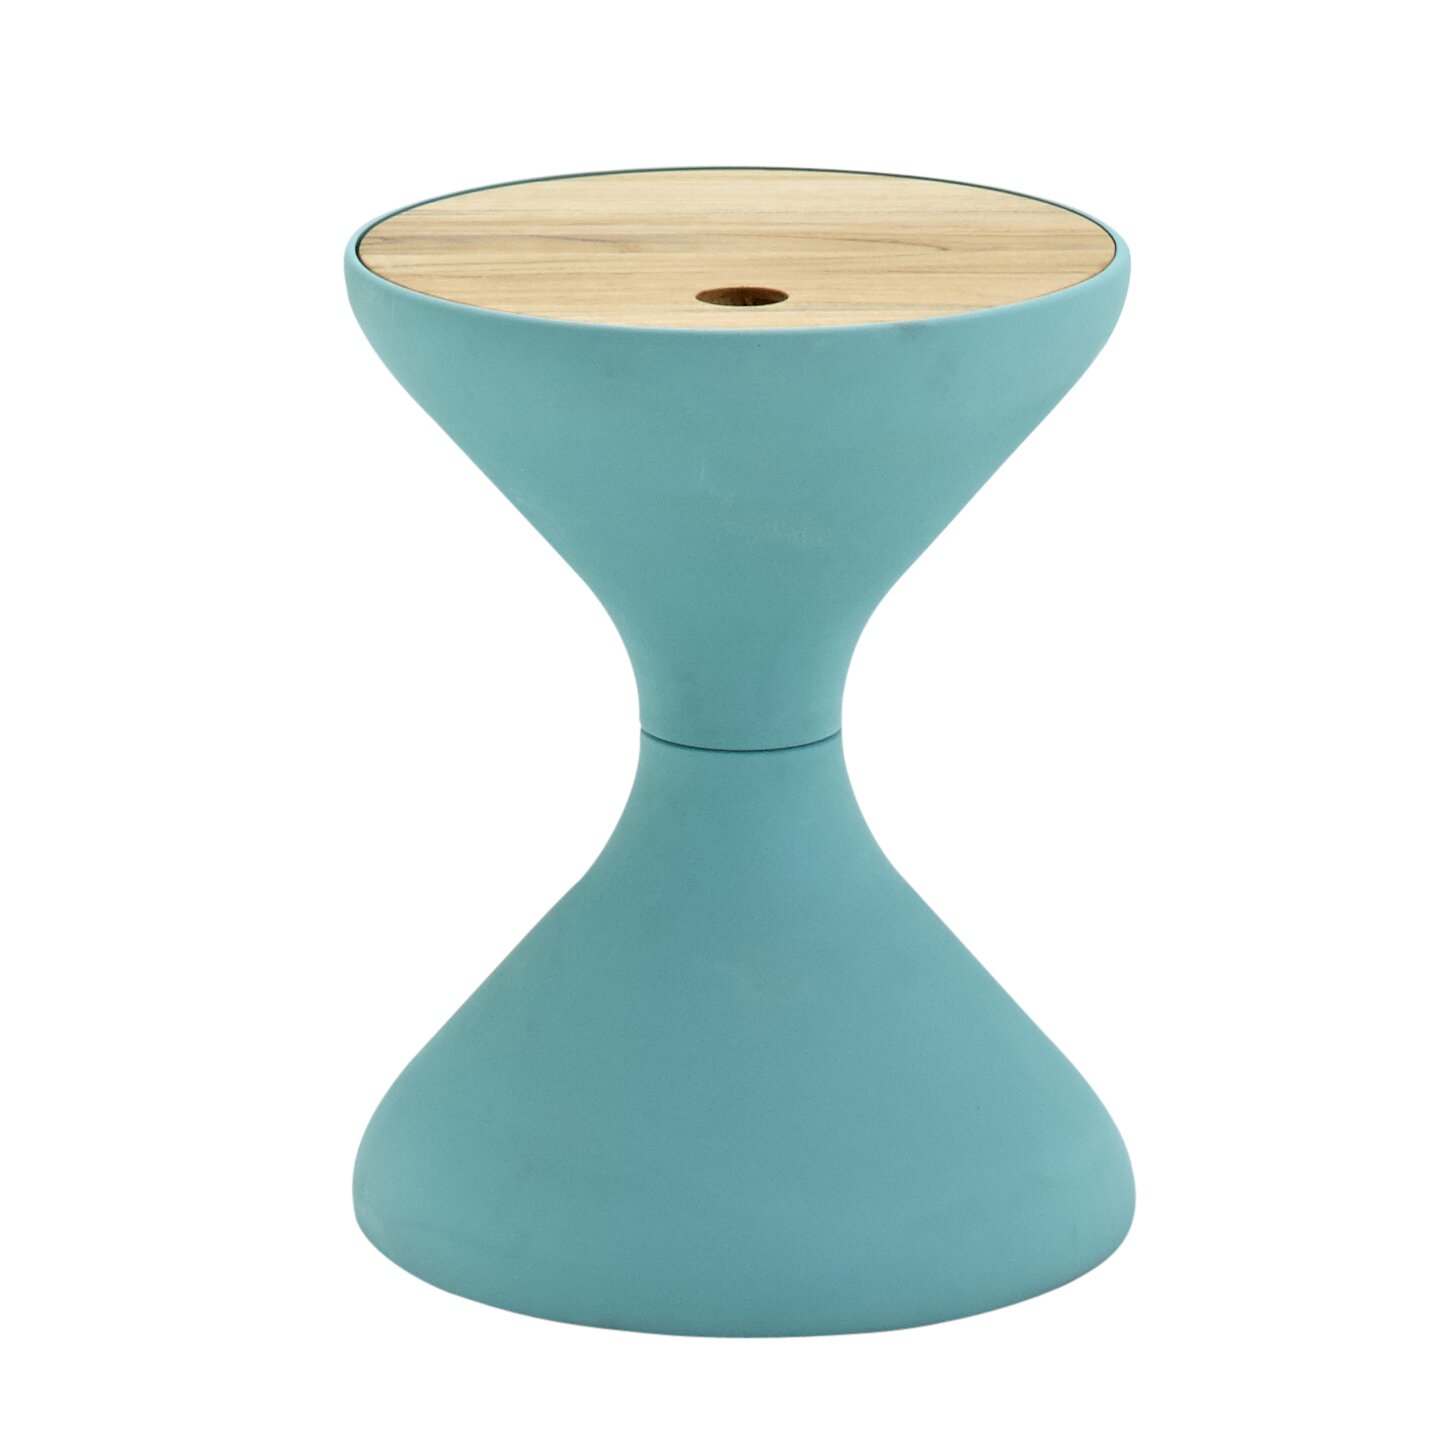 Bells Sidetable by Gloster in blue